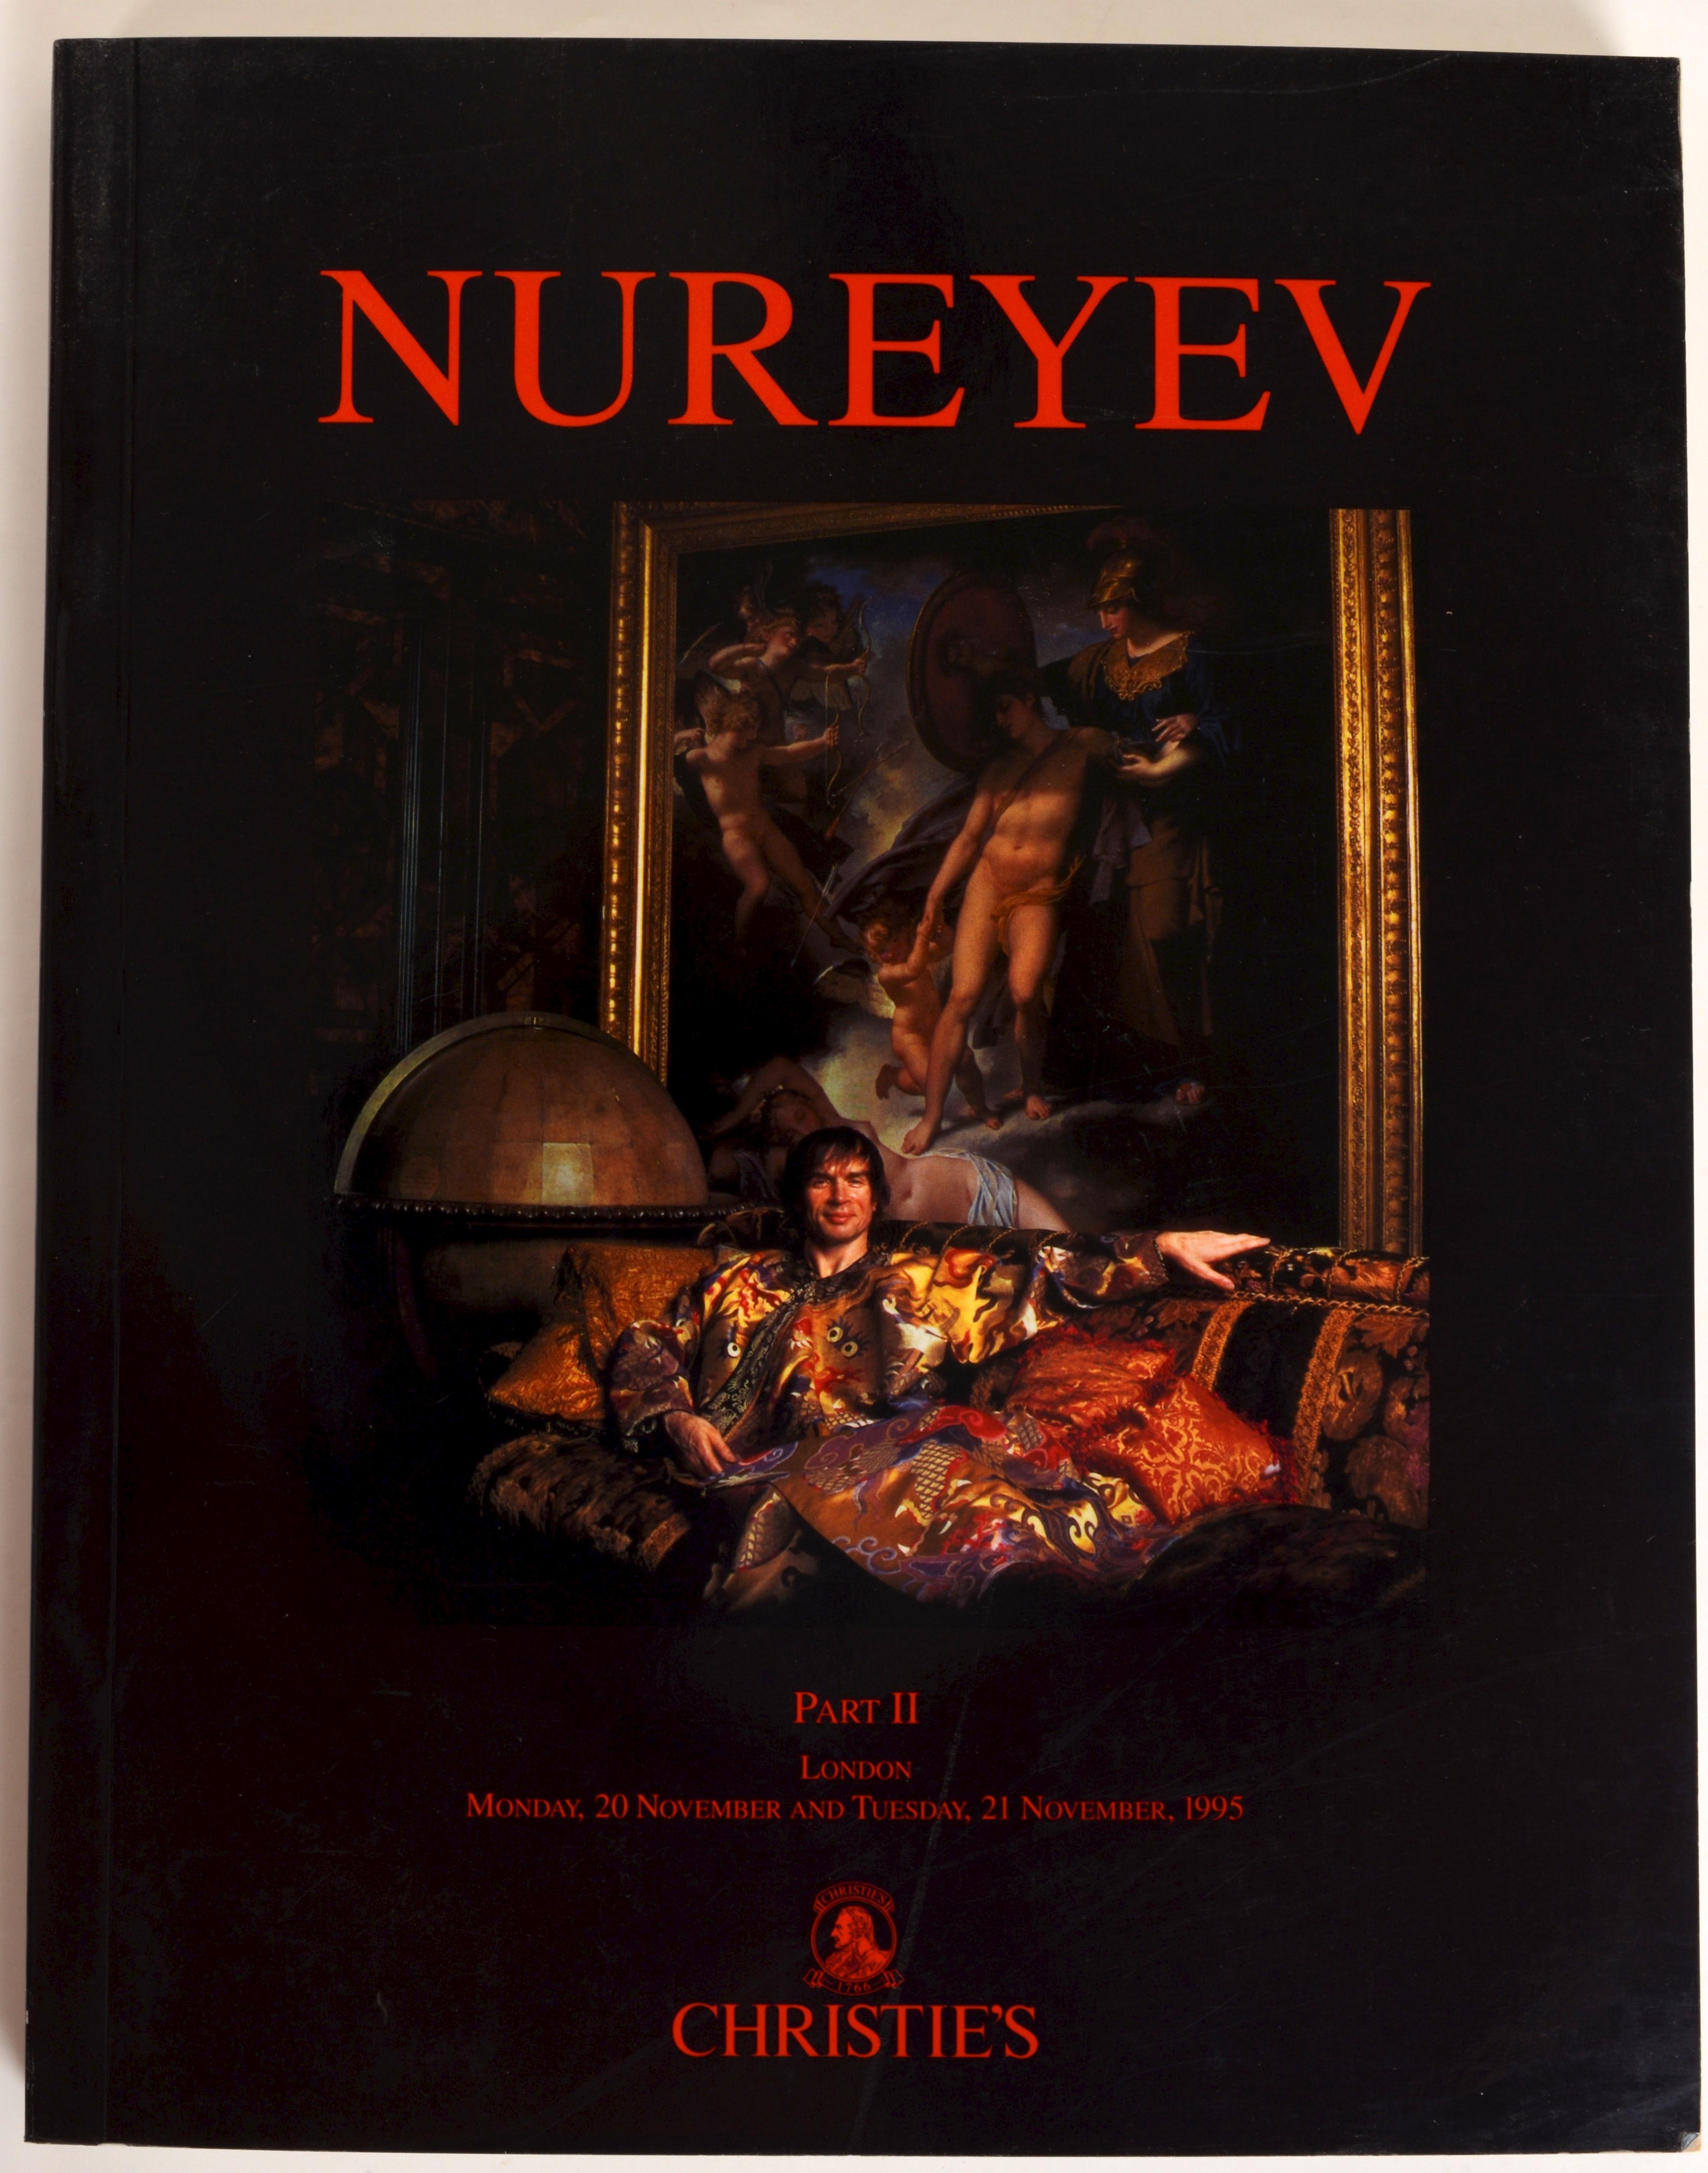 Christie's London, Nureyev Part I and II. Pair of Christies 1st ed catalogs, London: Christie's, 1995. Volume I hardcover with dust jacket Volume II softcover. With old master and 19th century paintings, drawings, prints, books, sculpture,